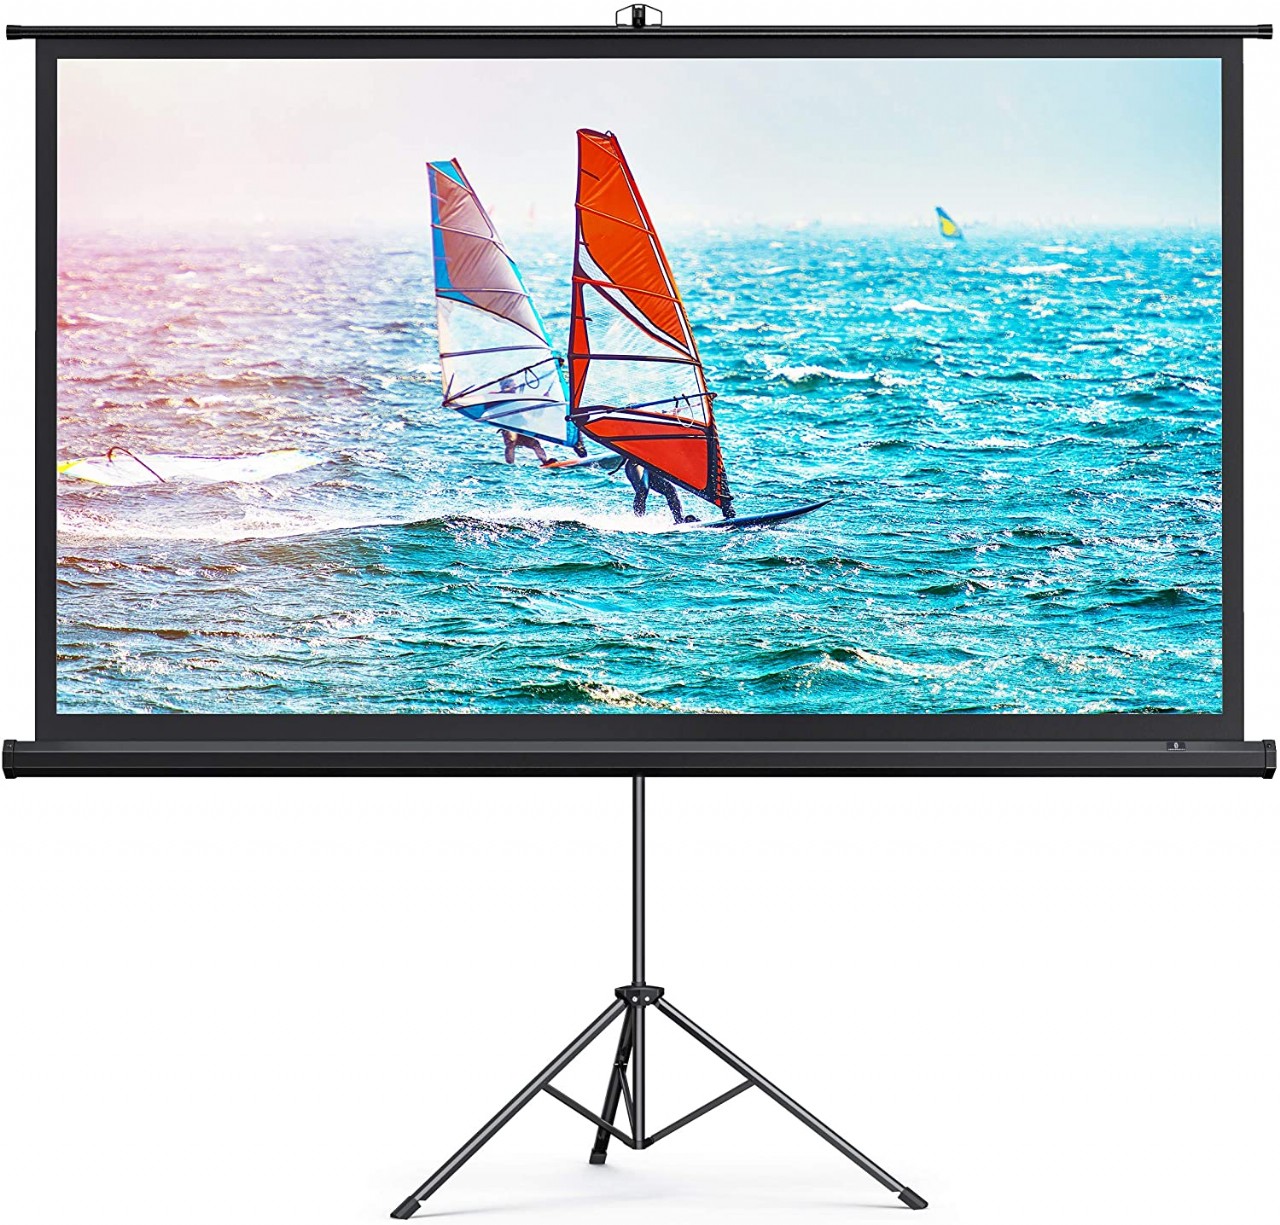 TaoTronics Projector Screen with Stand,Indoor Outdoor PVC Projection Screen 4K HD 100'' 16: 9 Wrinkl